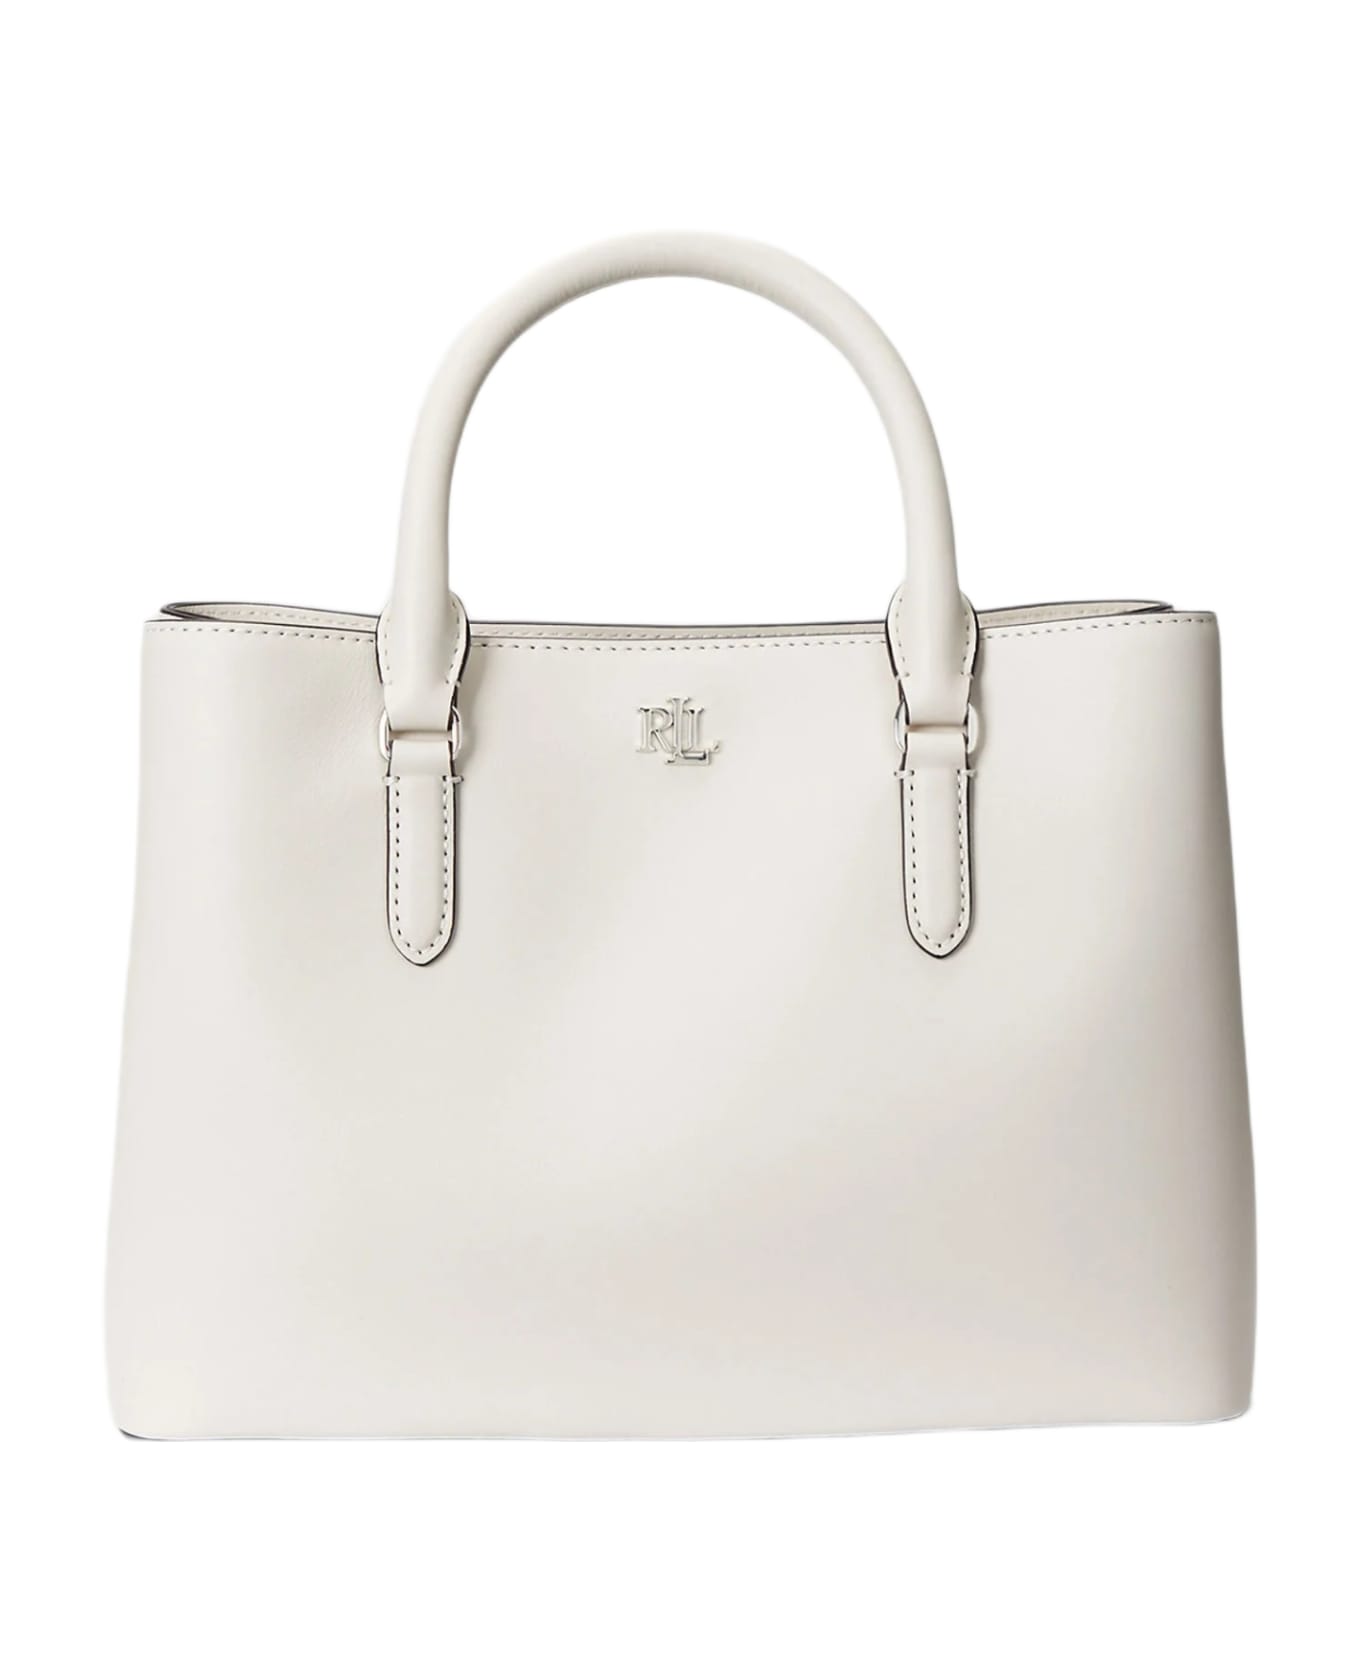 Polo Ralph Lauren Marcy 26 Satchel Small - White トートバッグ